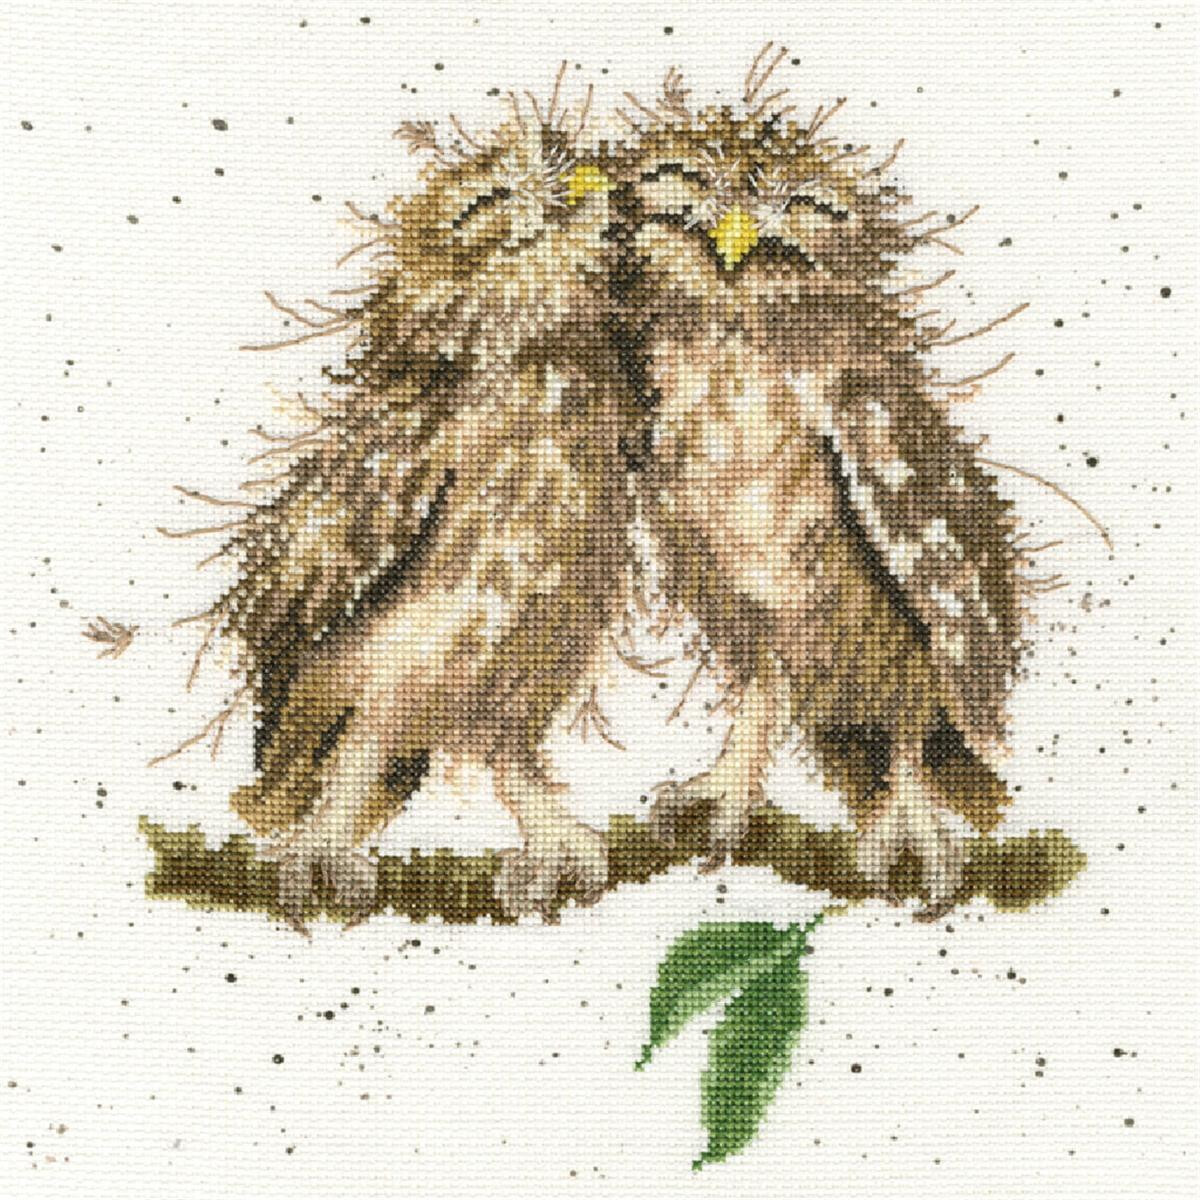 An embroidery pack or embroidery picture from Bothy...